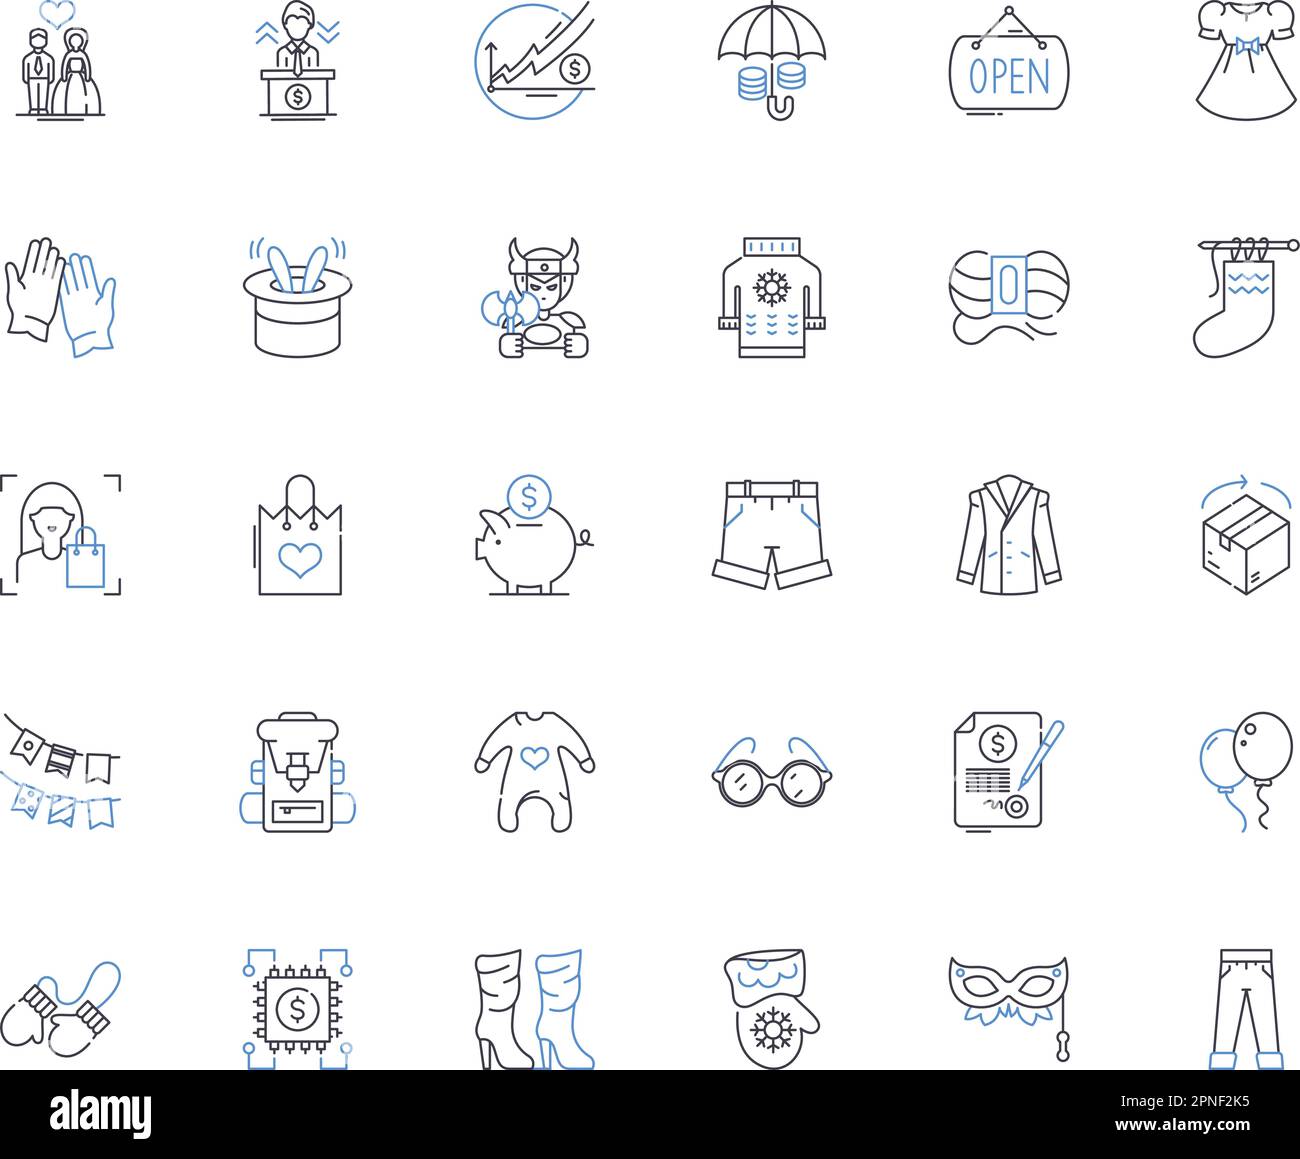 Film industry line icons collection. Cinema, Hollywood, Blockbuster, Sequel, Indie, Auteur, Casting vector and linear illustration. Box office Stock Vector